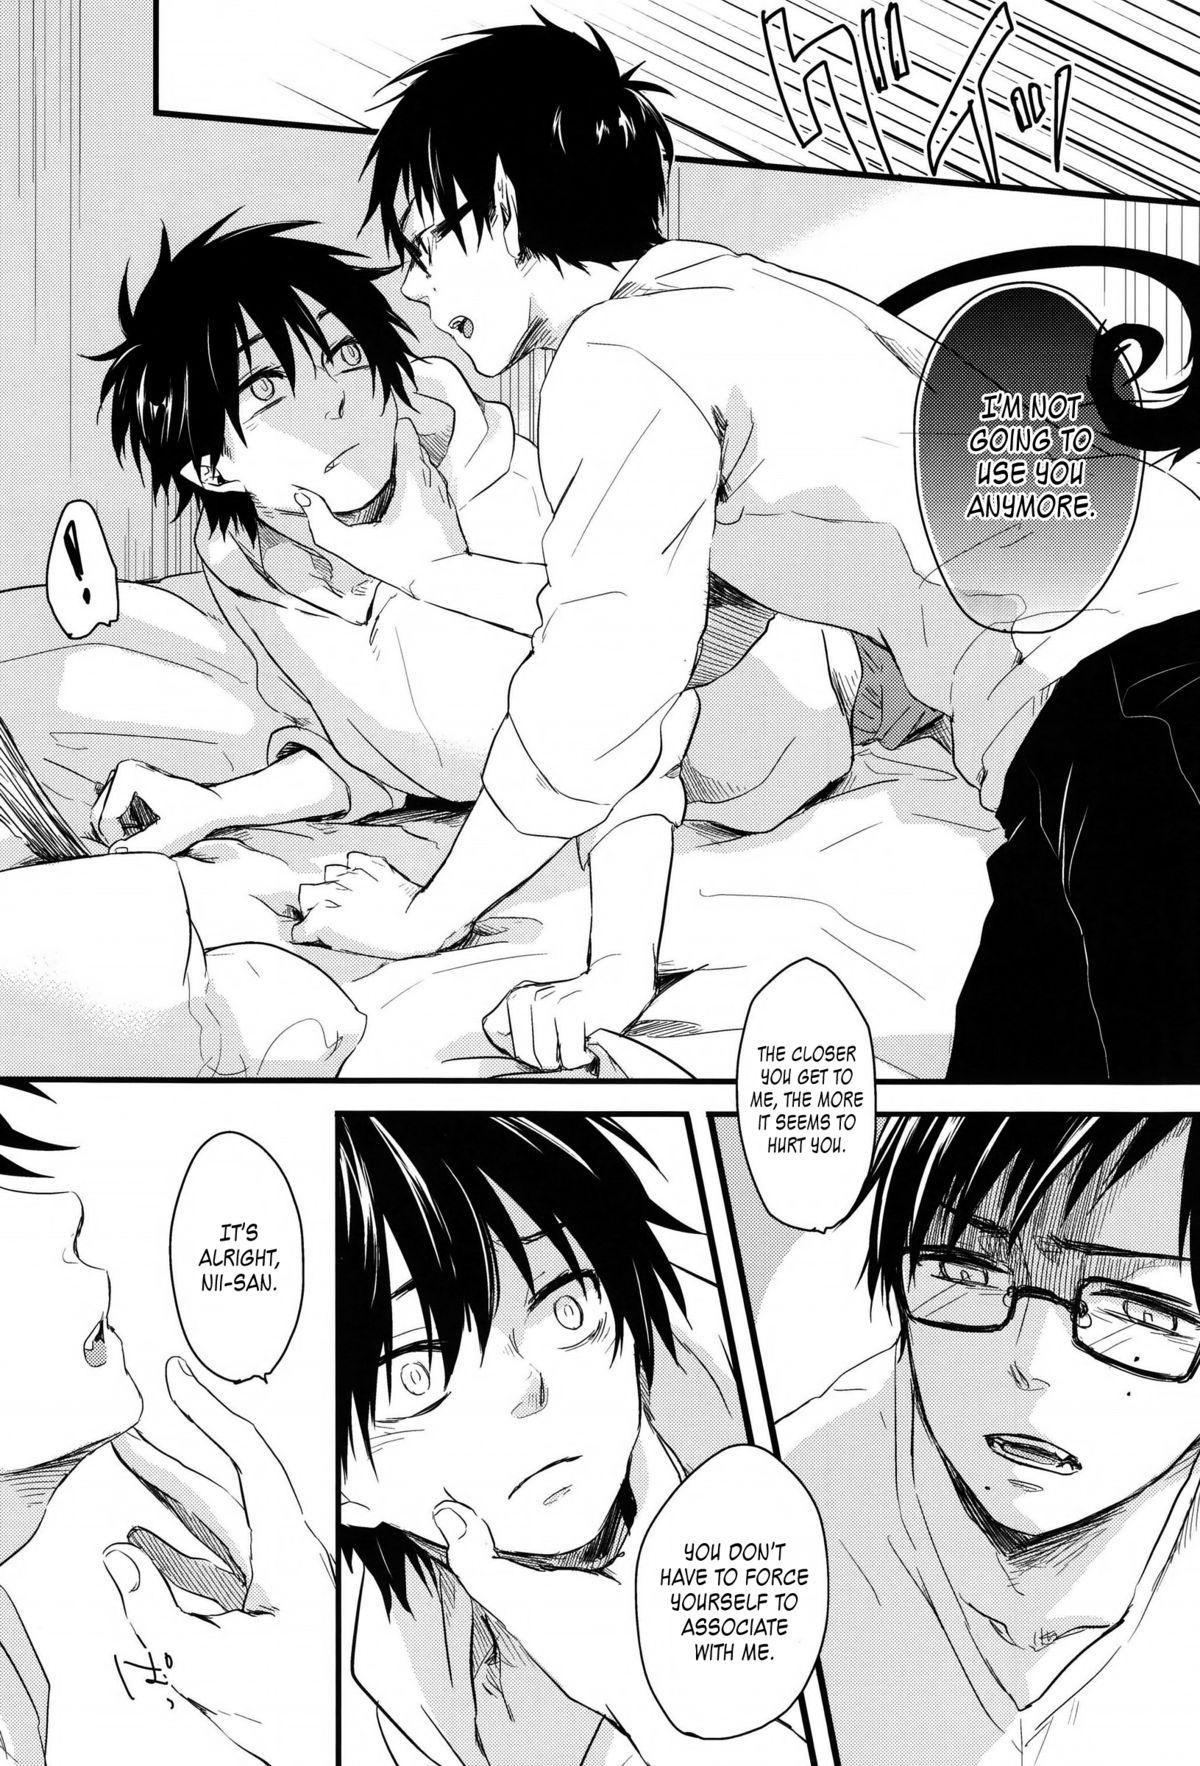 Free My Life - Ao no exorcist Spandex - Page 12